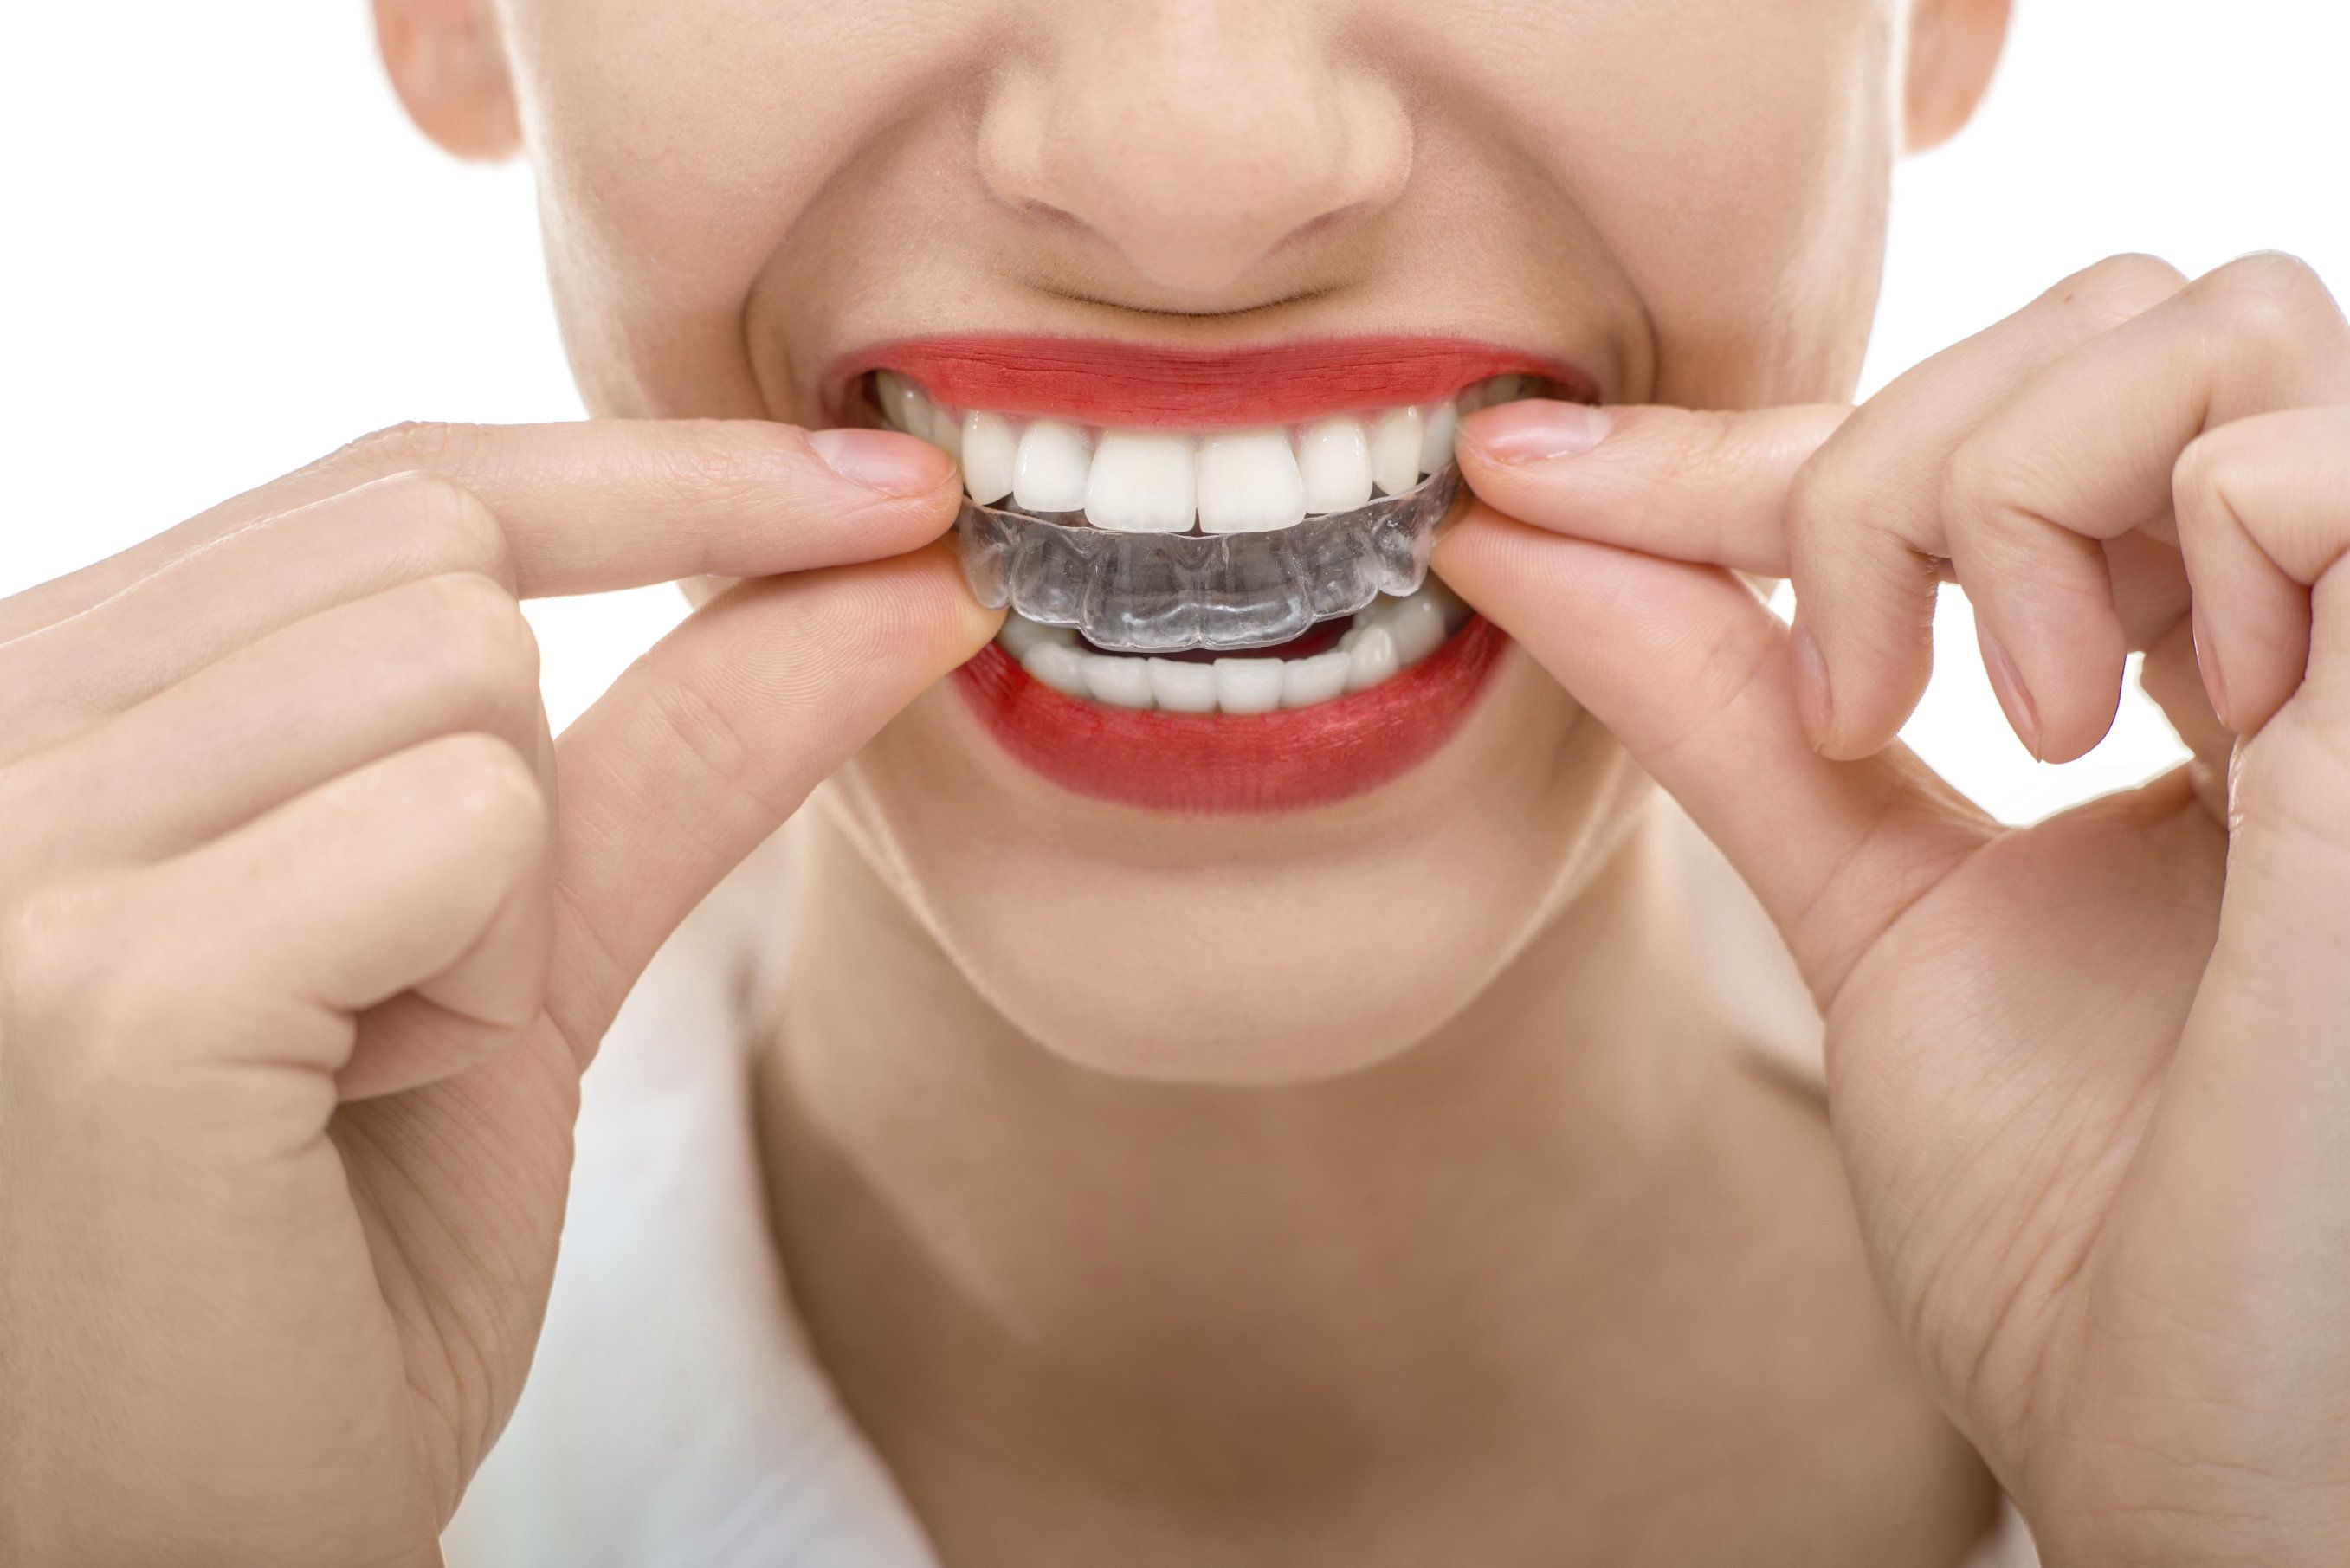 Invisalign vs braces (which treatment is better for my needs?)